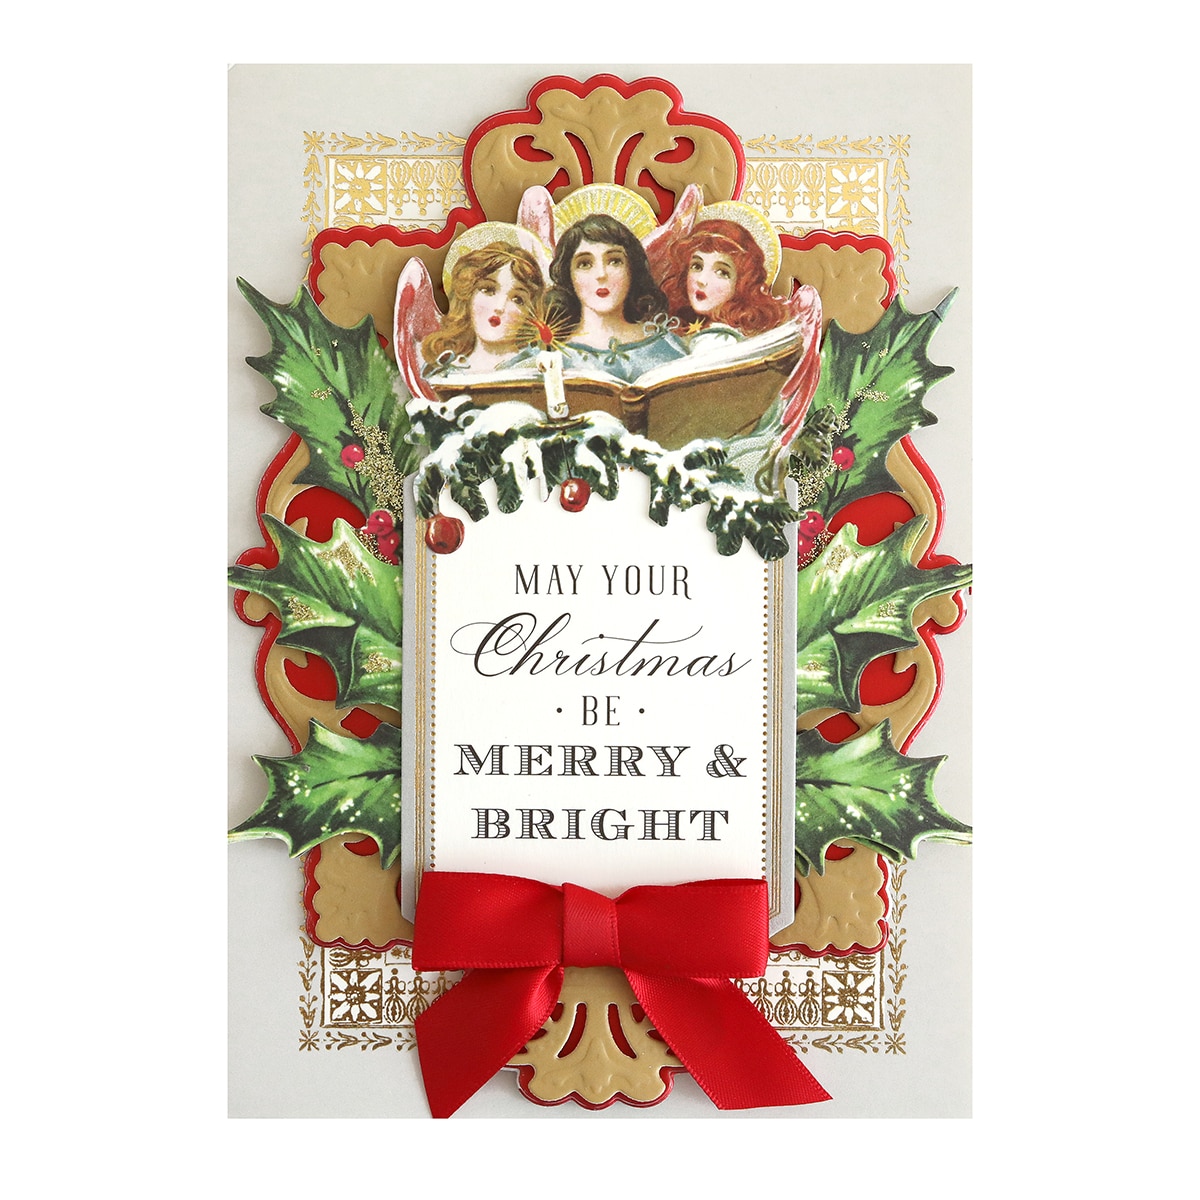 A christmas card with angels and a red bow.